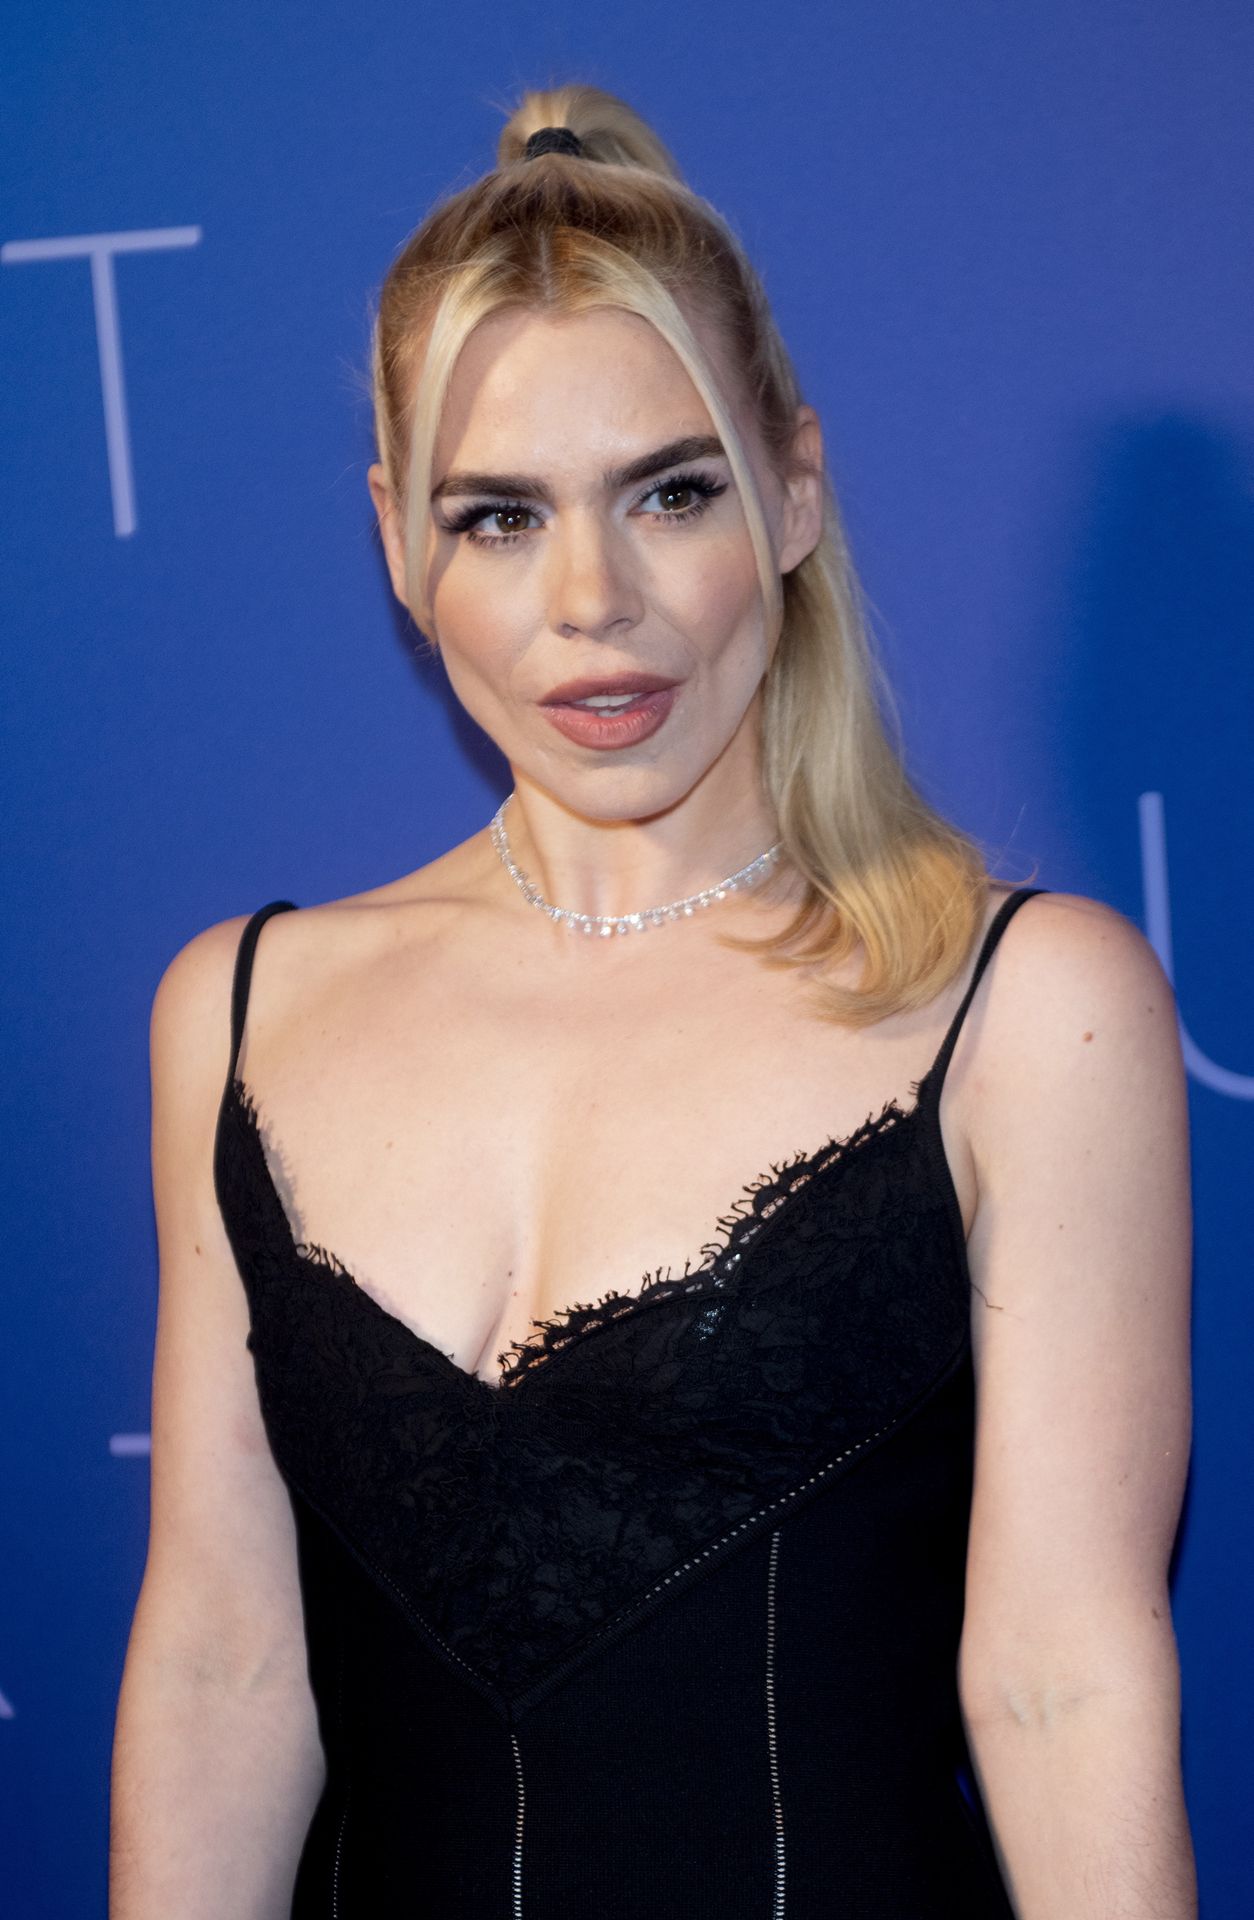 Billie Piper Smiles at the Sky Up Next Event (67 Photos)